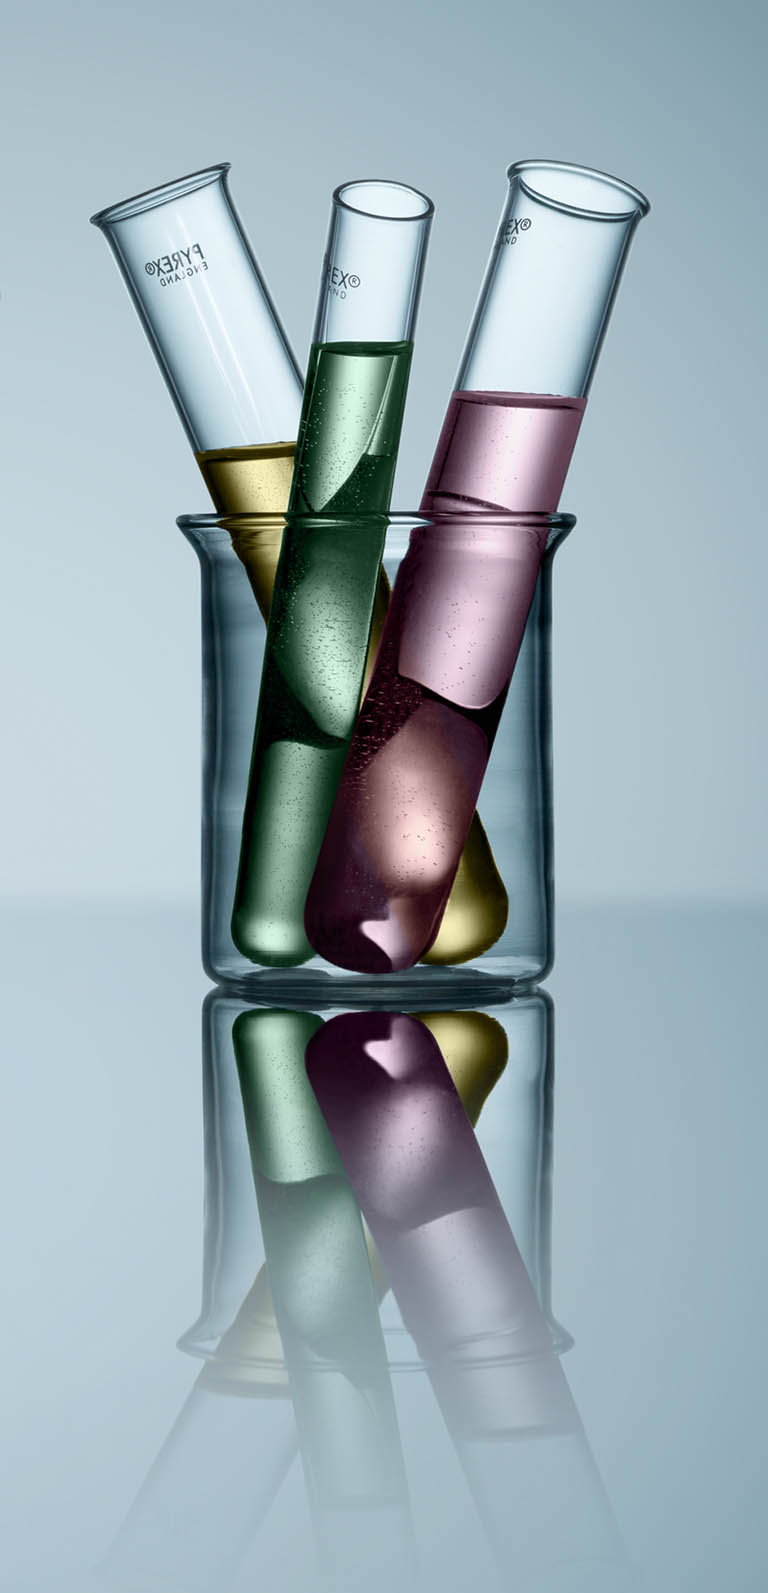 Still Life Product Photography of Glass jar and tubes by Packshot Factory